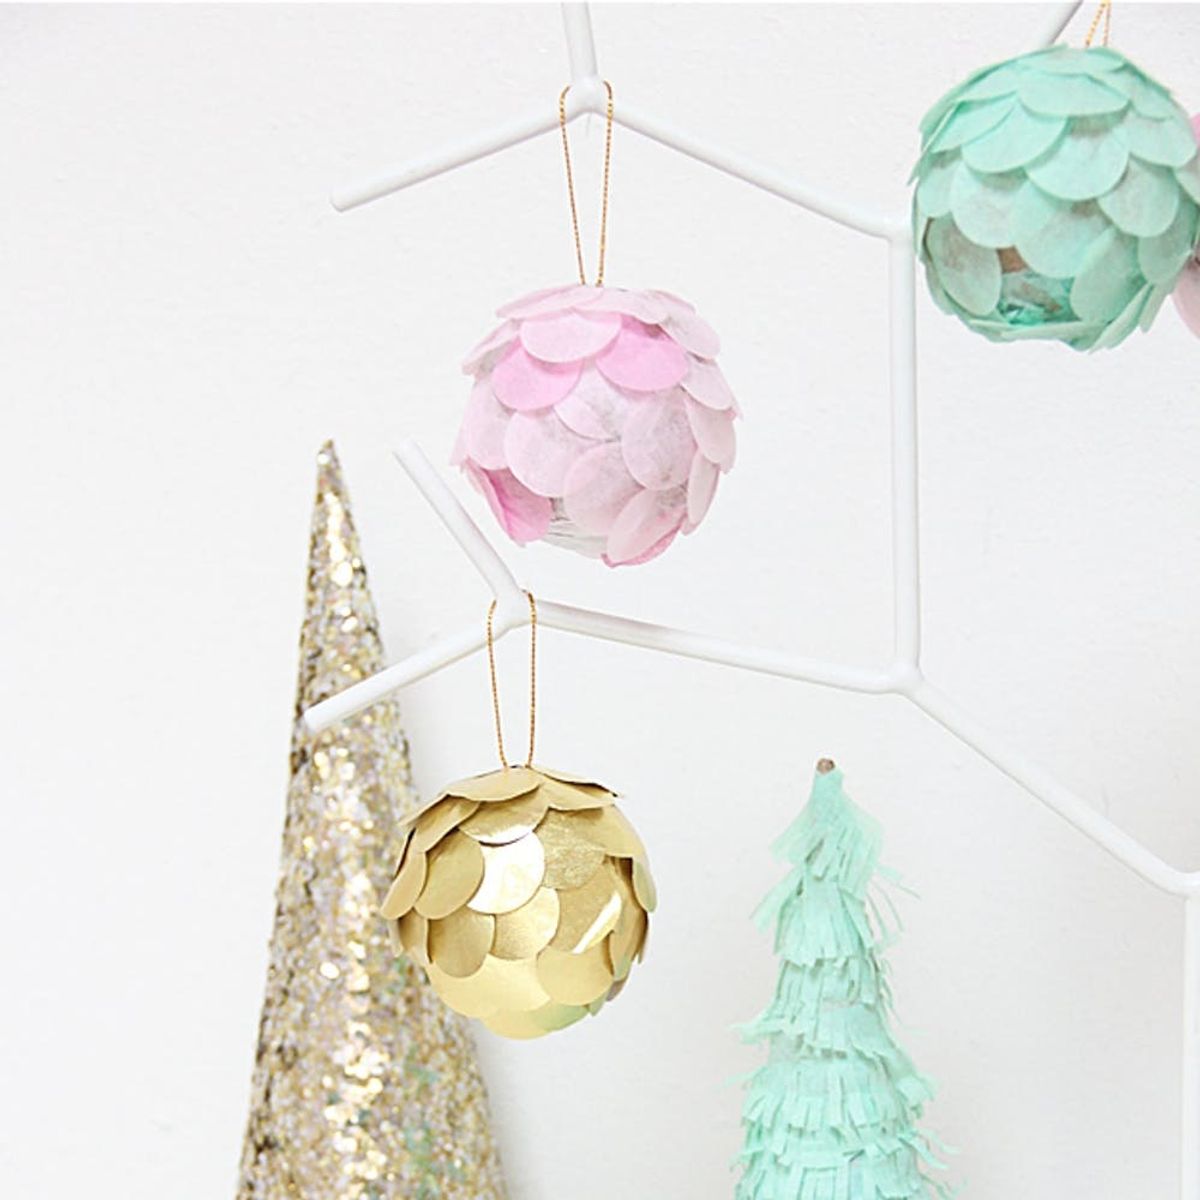 13 DIY Paper Ornaments That Are Cheap to Make